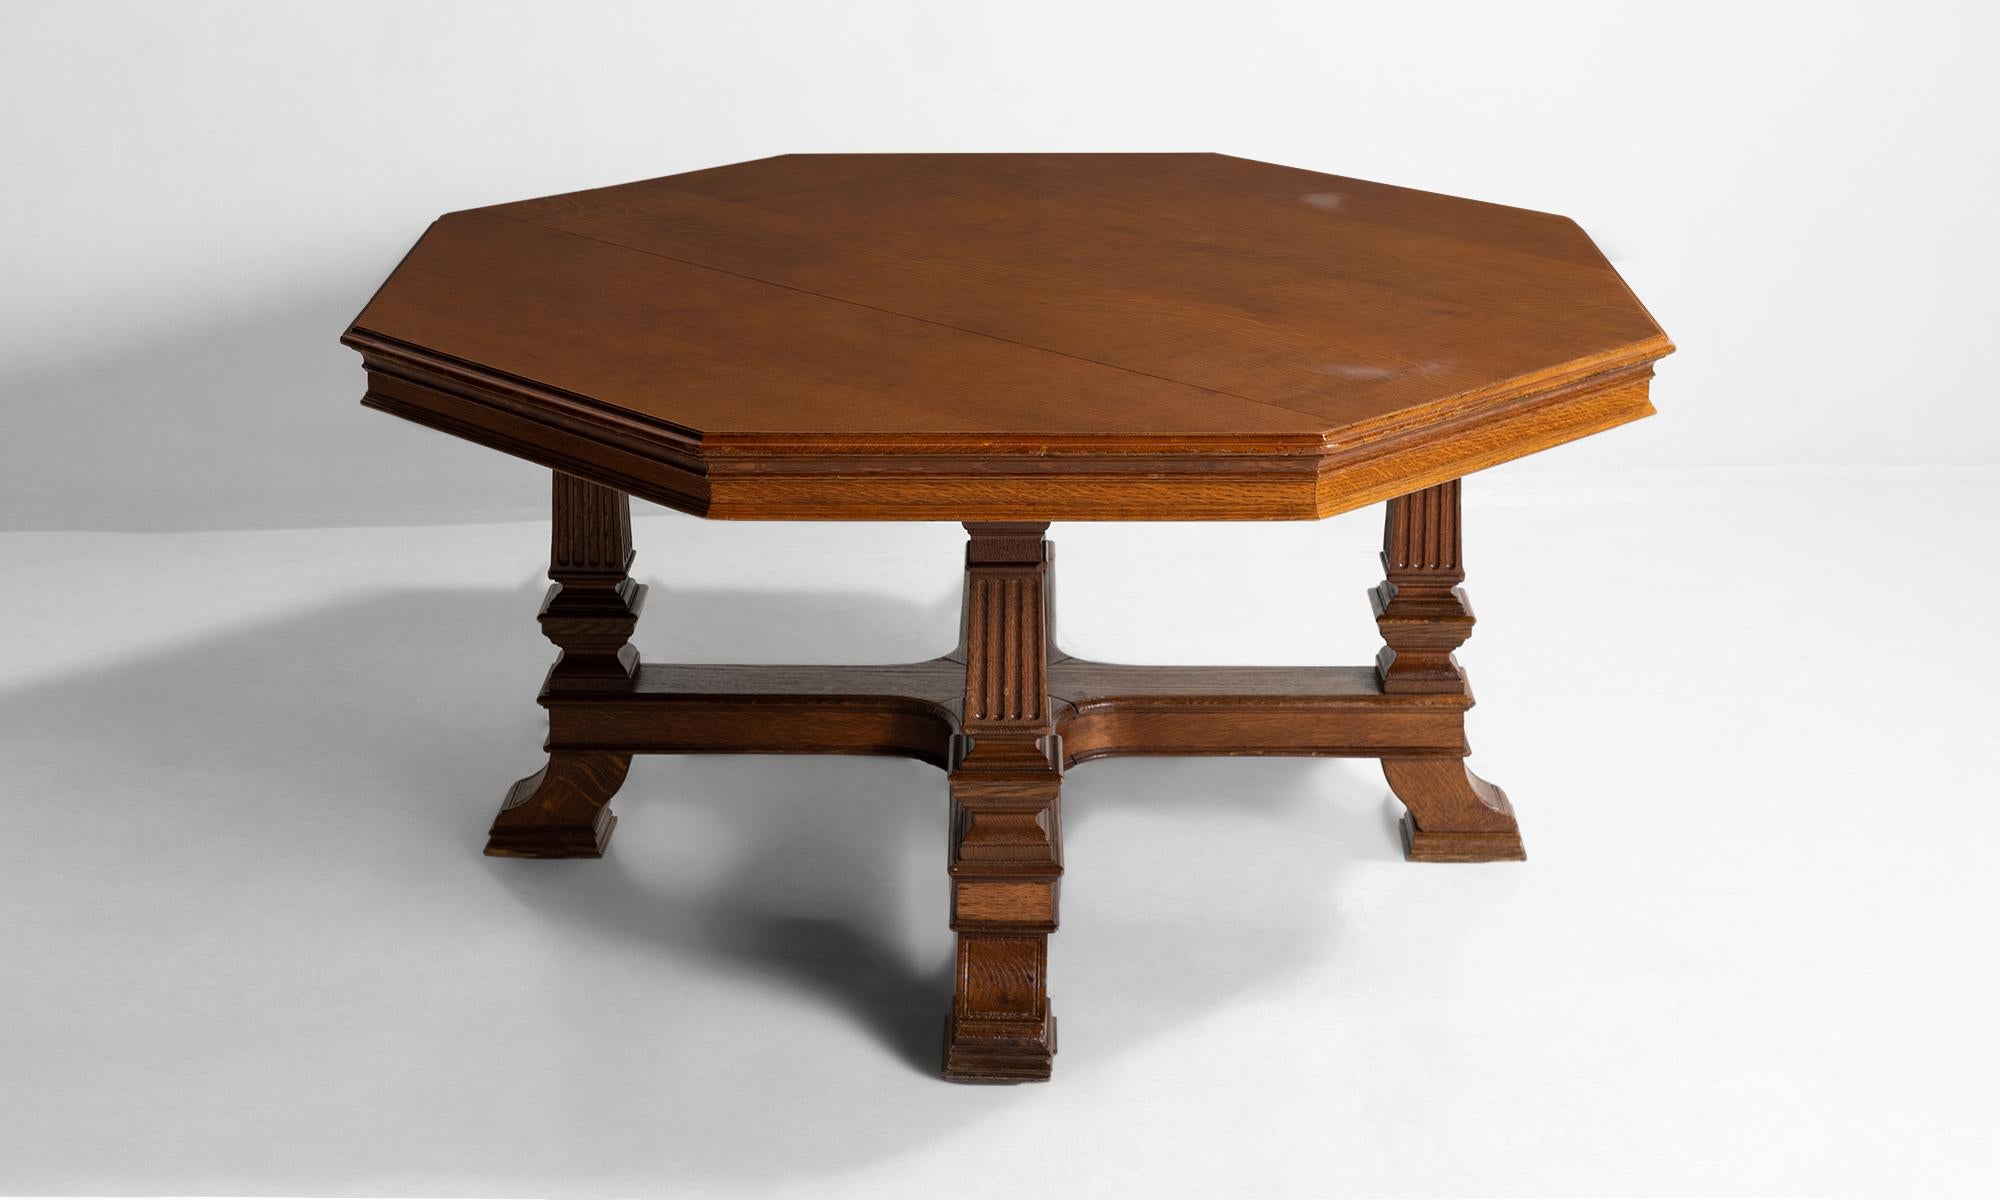 Octagonal oak table, England circa 1890.

Finely carved English refectory table constructed in quarter sawn oak.

Measures: 57” W x 57” D x 29.5” H x 25.5” apron.